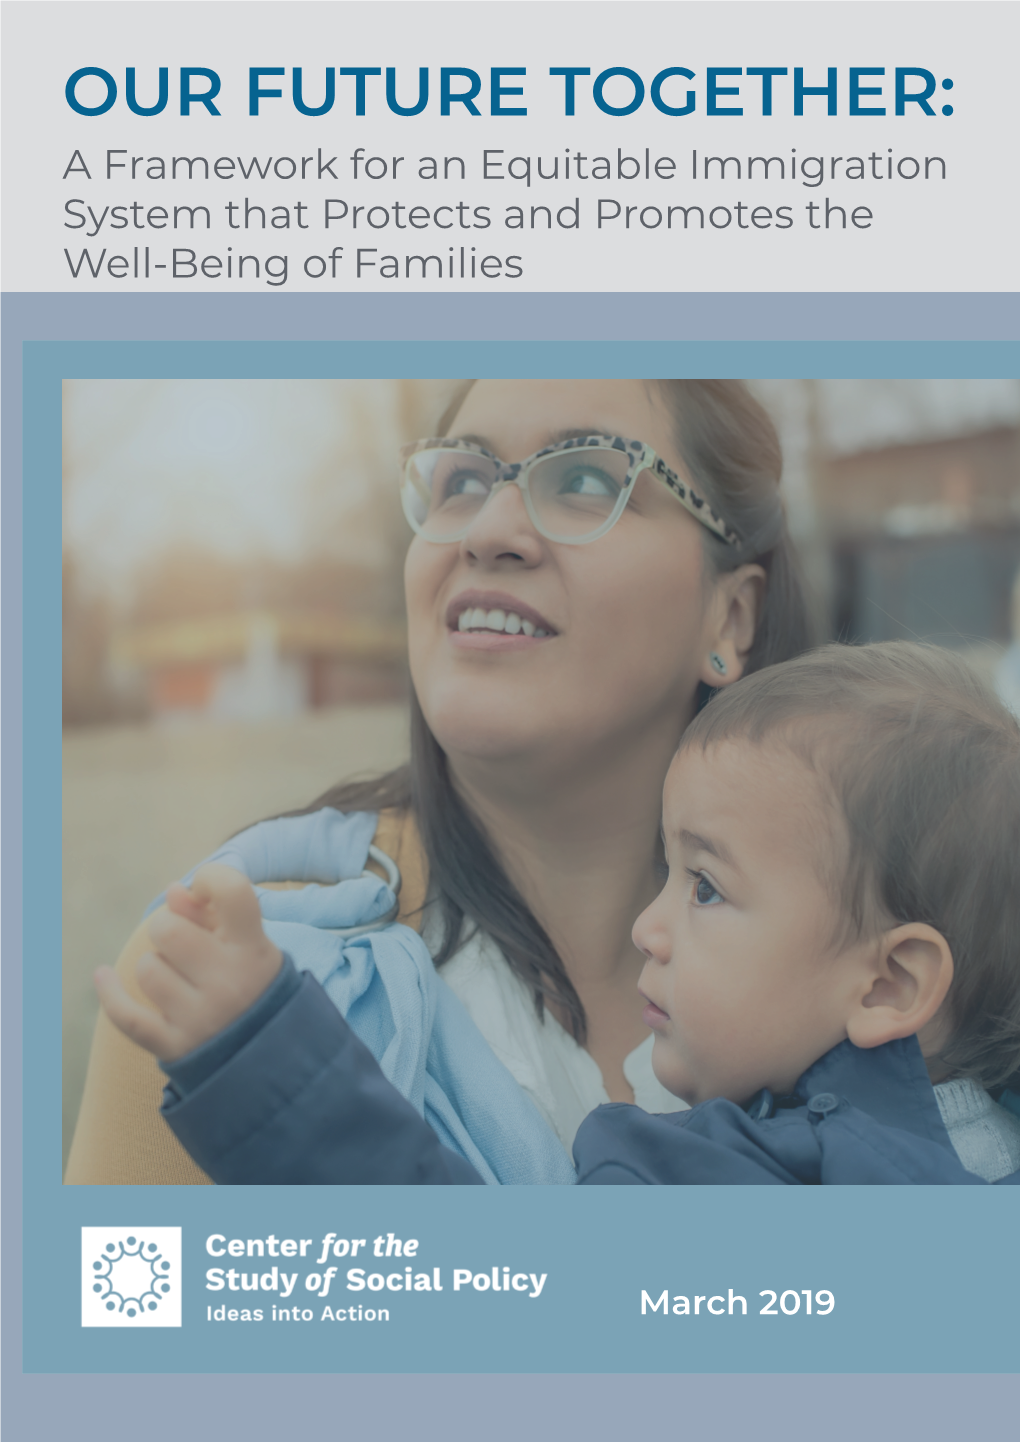 OUR FUTURE TOGETHER: a Framework for an Equitable Immigration System That Protects and Promotes the Well-Being of Families